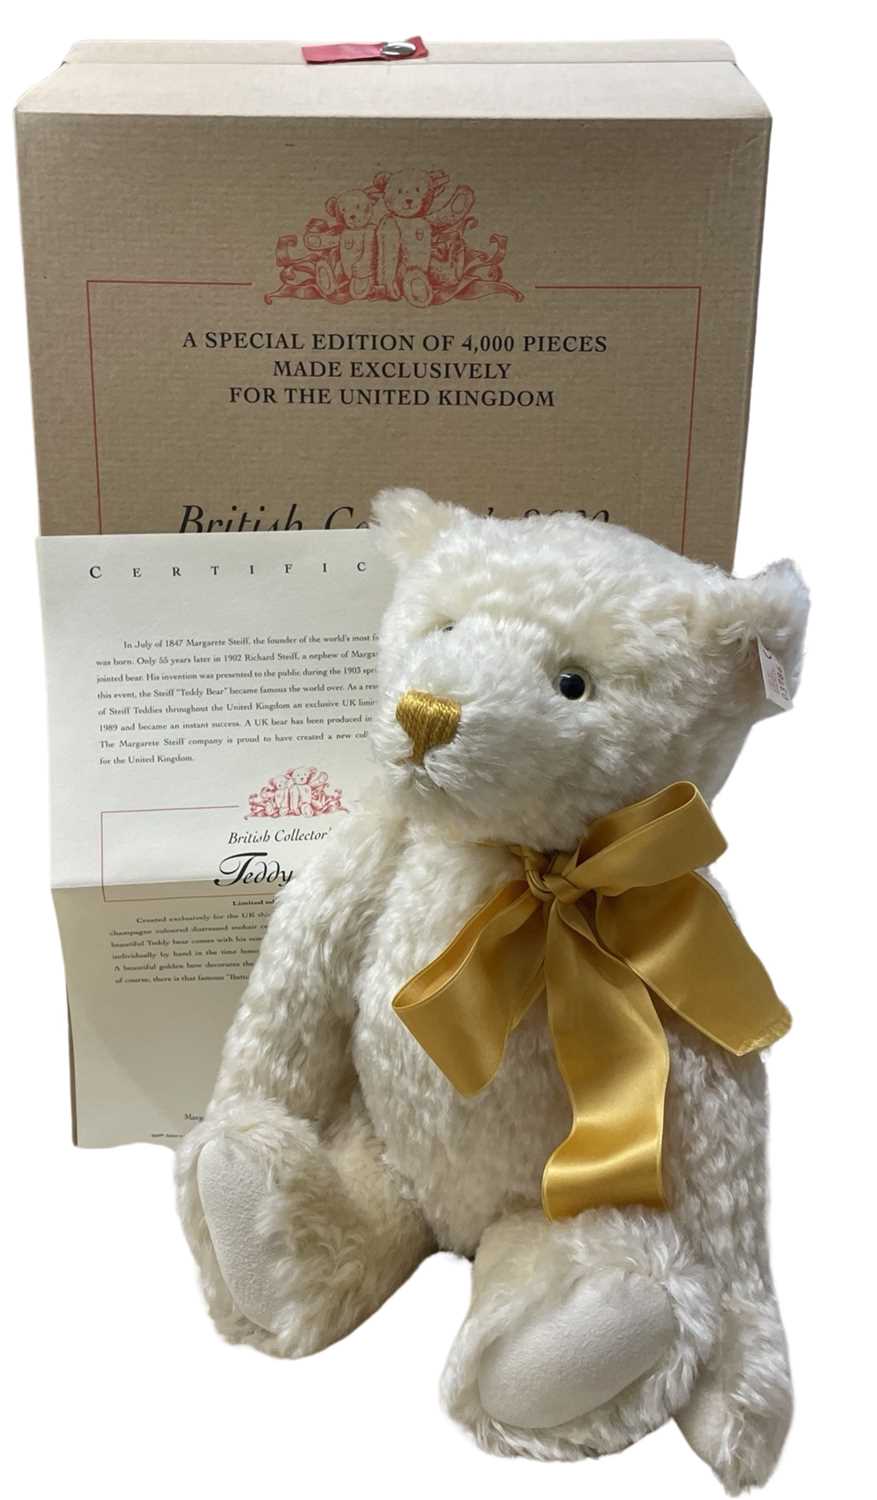 A boxed limited edition Steiff British Collector's 2000 Teddy Bear in champagne, with certificate.